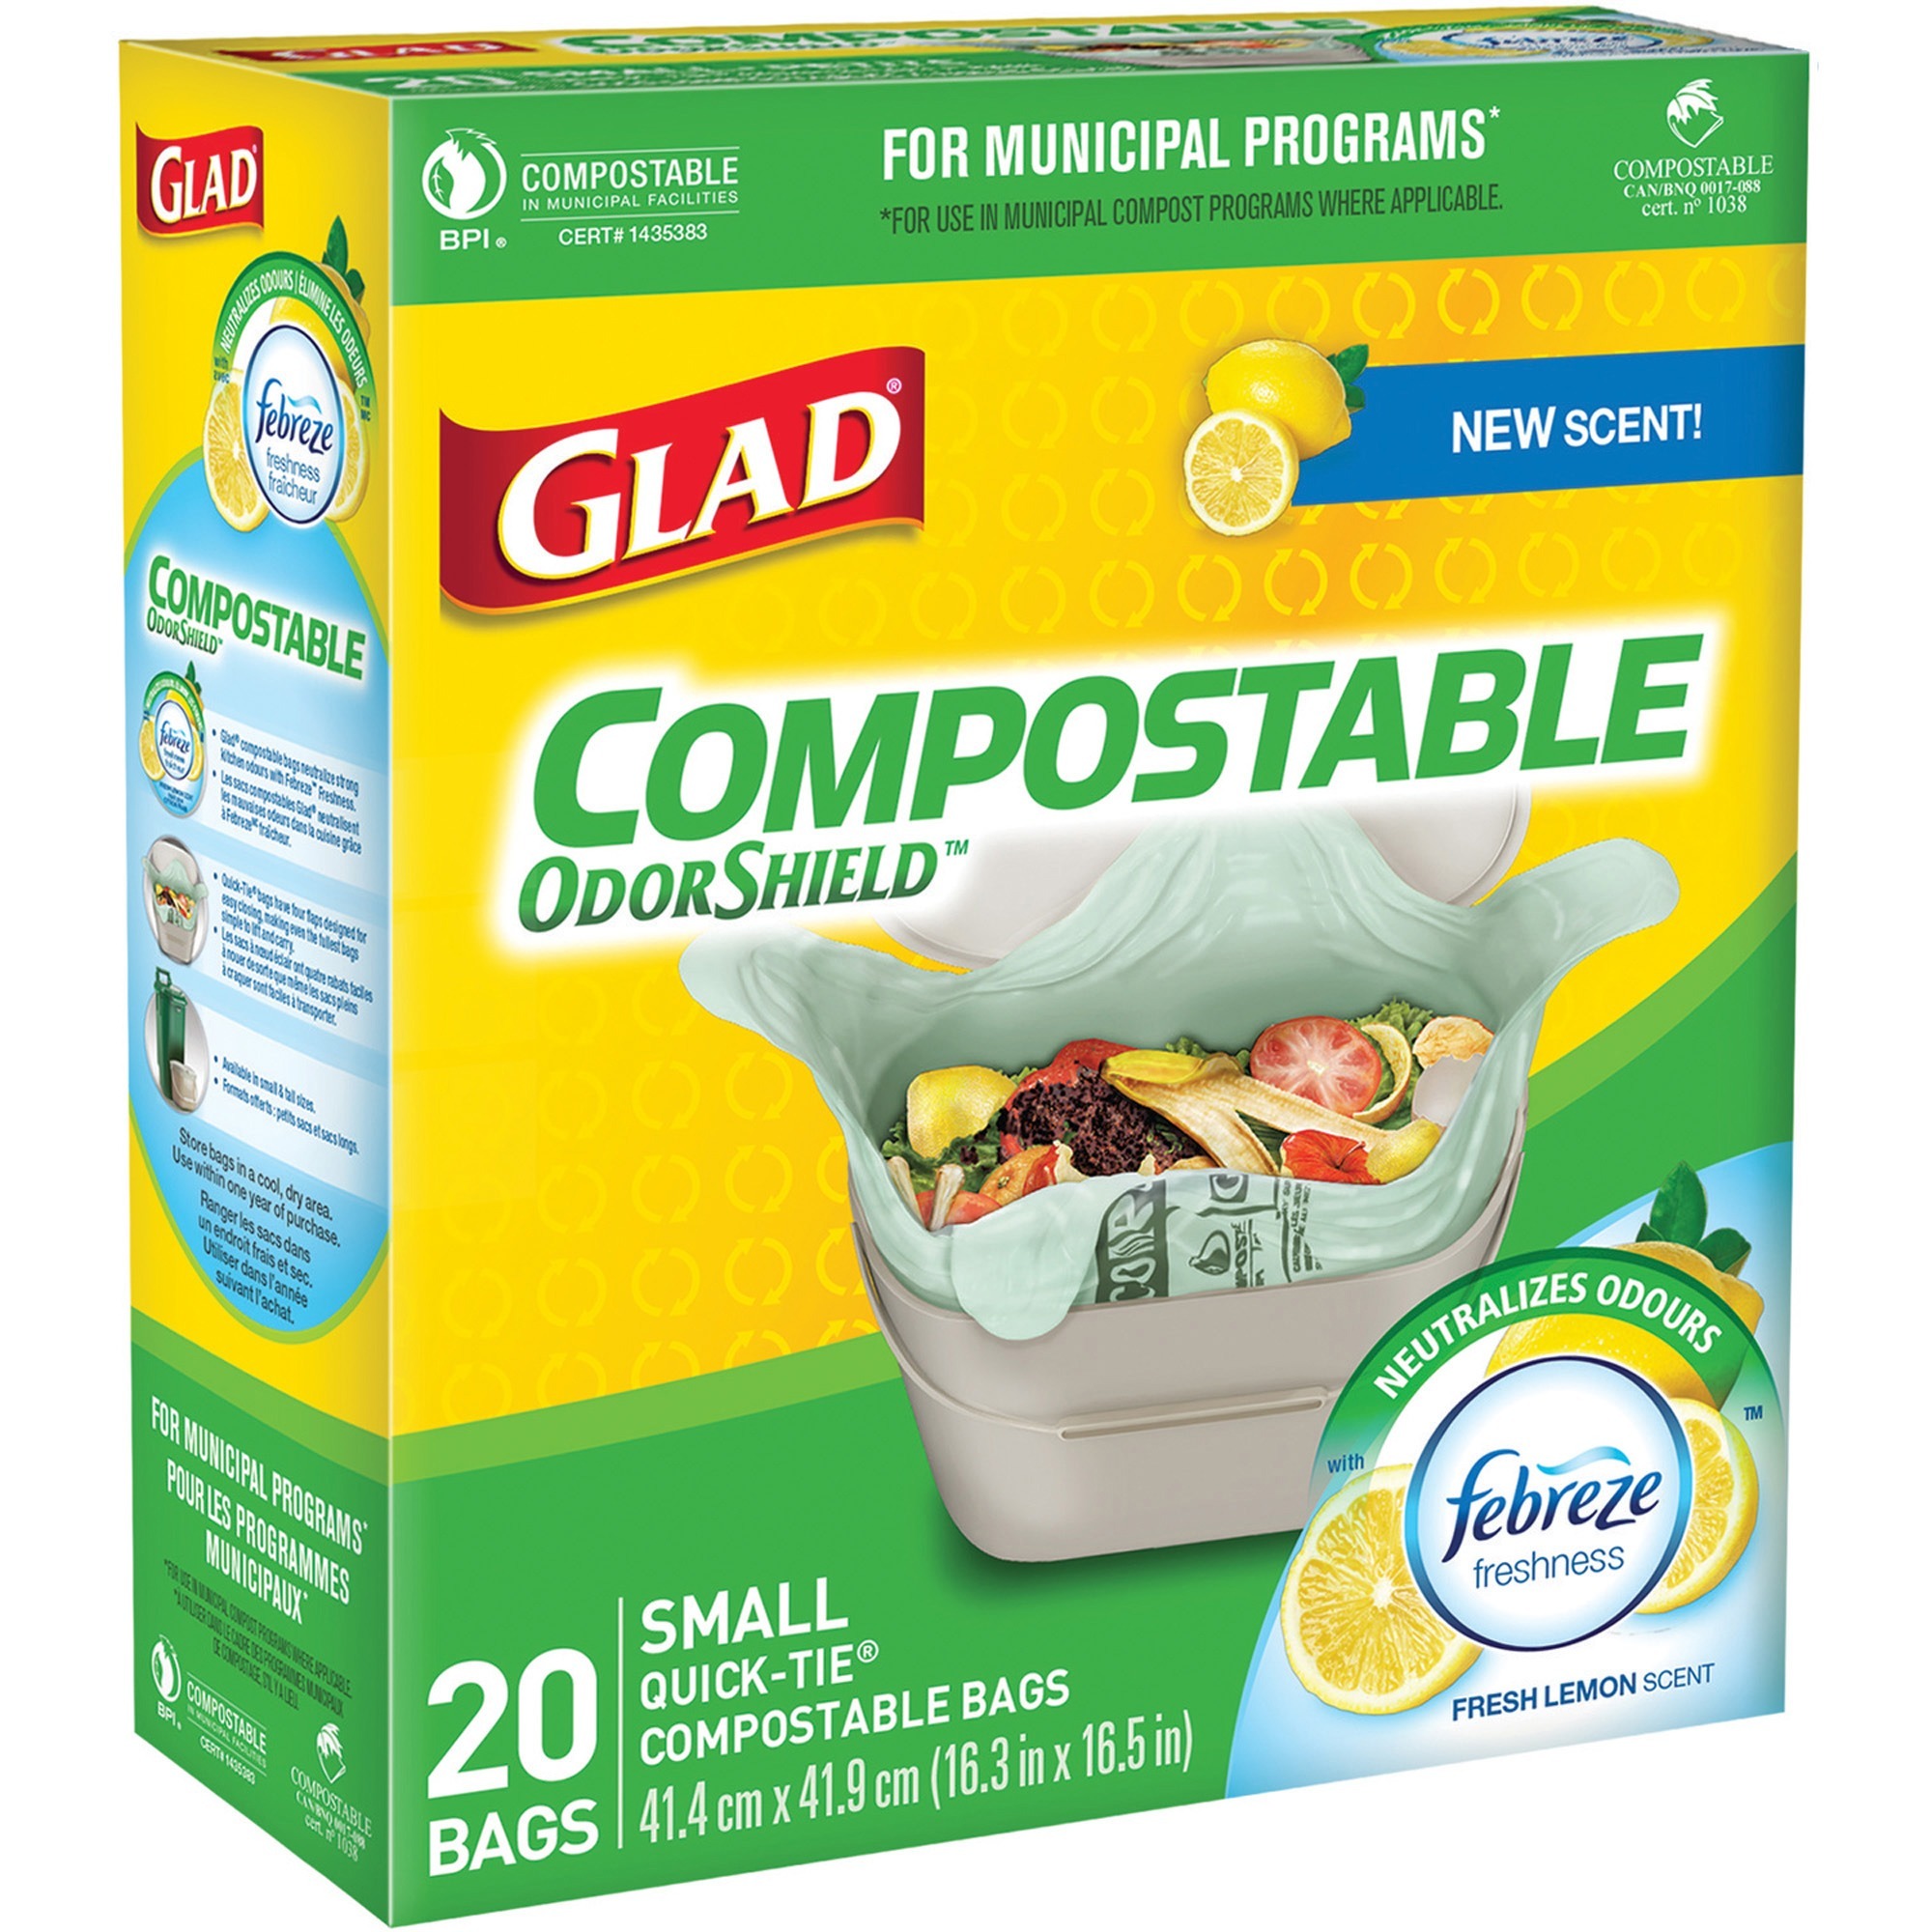 Glad Compostable Bags Small Size 2.6 gal 16.3" (414